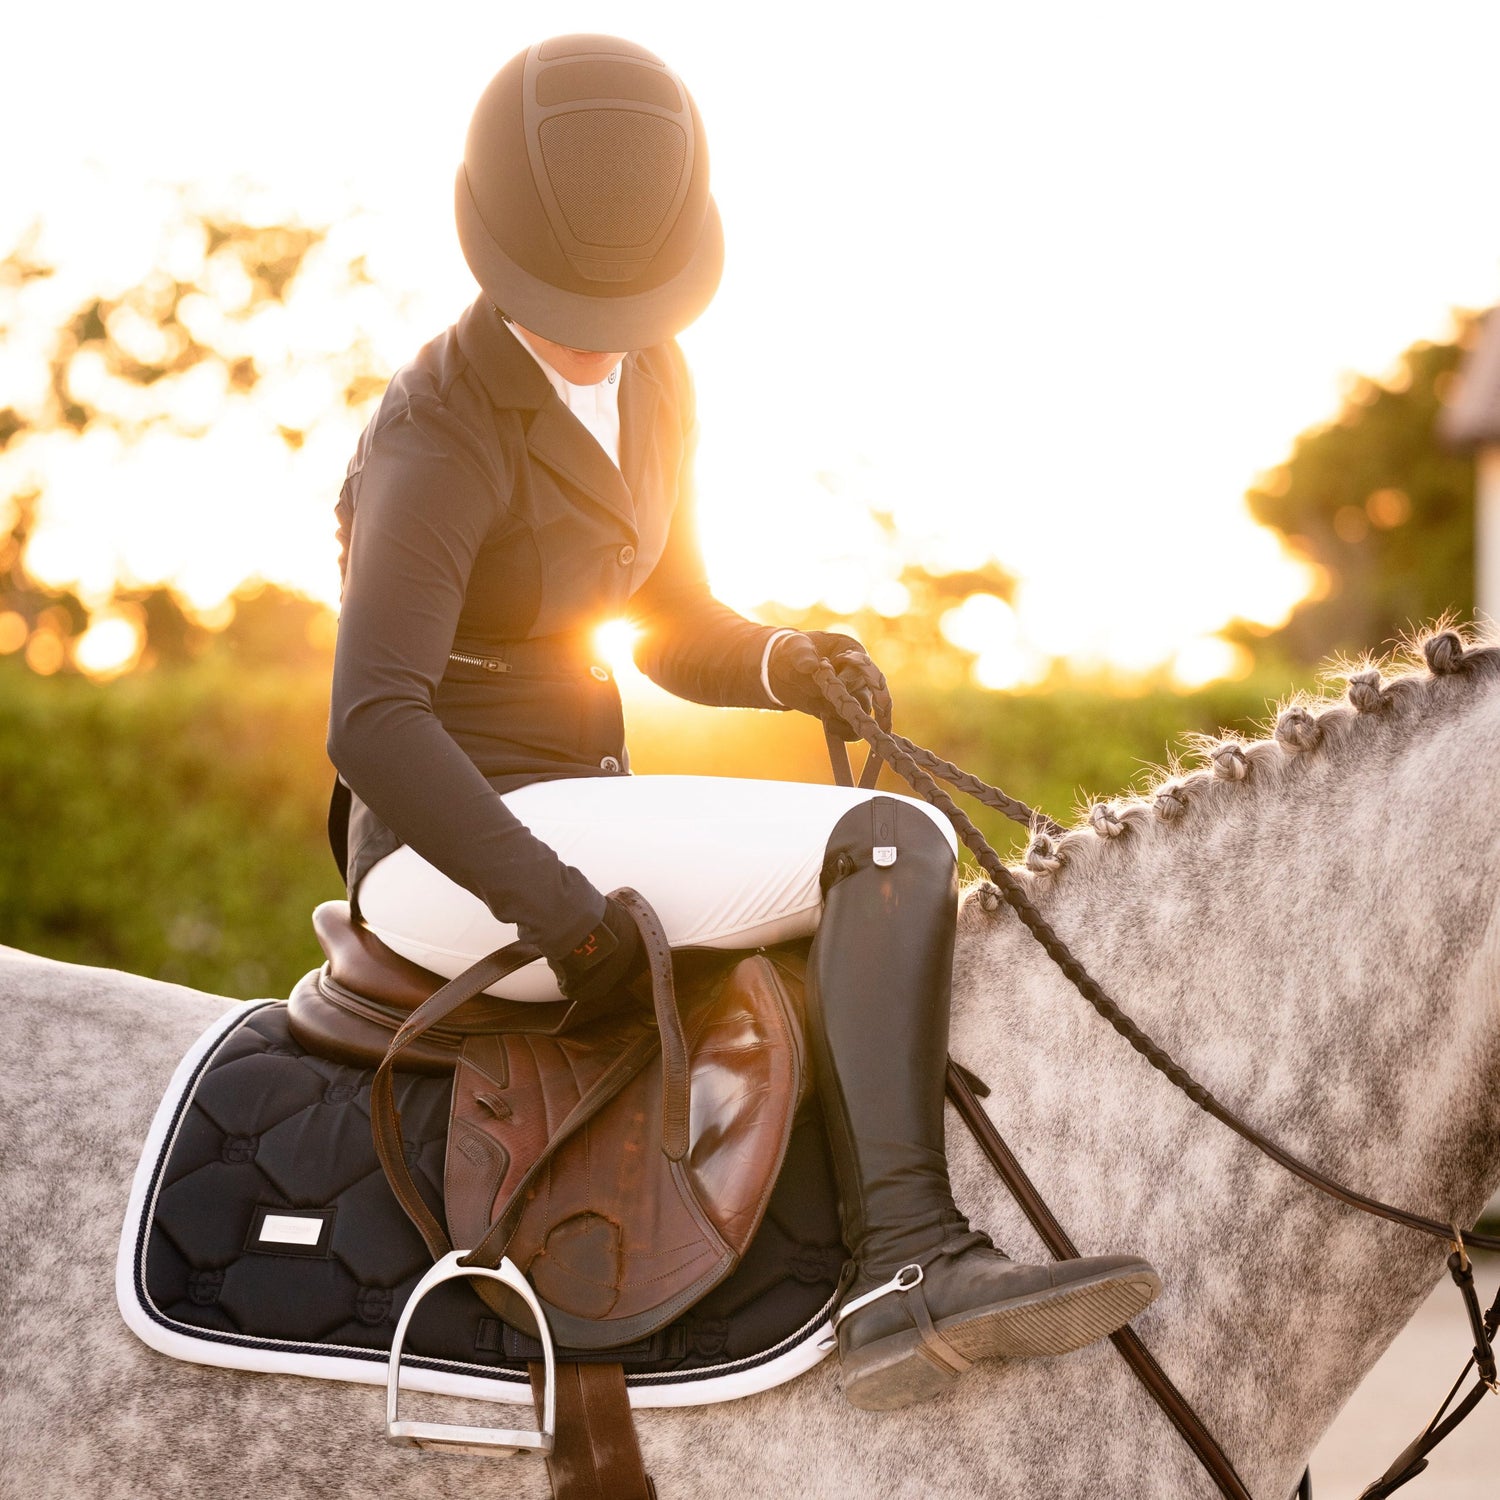 Saddle pads – what is a saddle pad, and why do we use them?